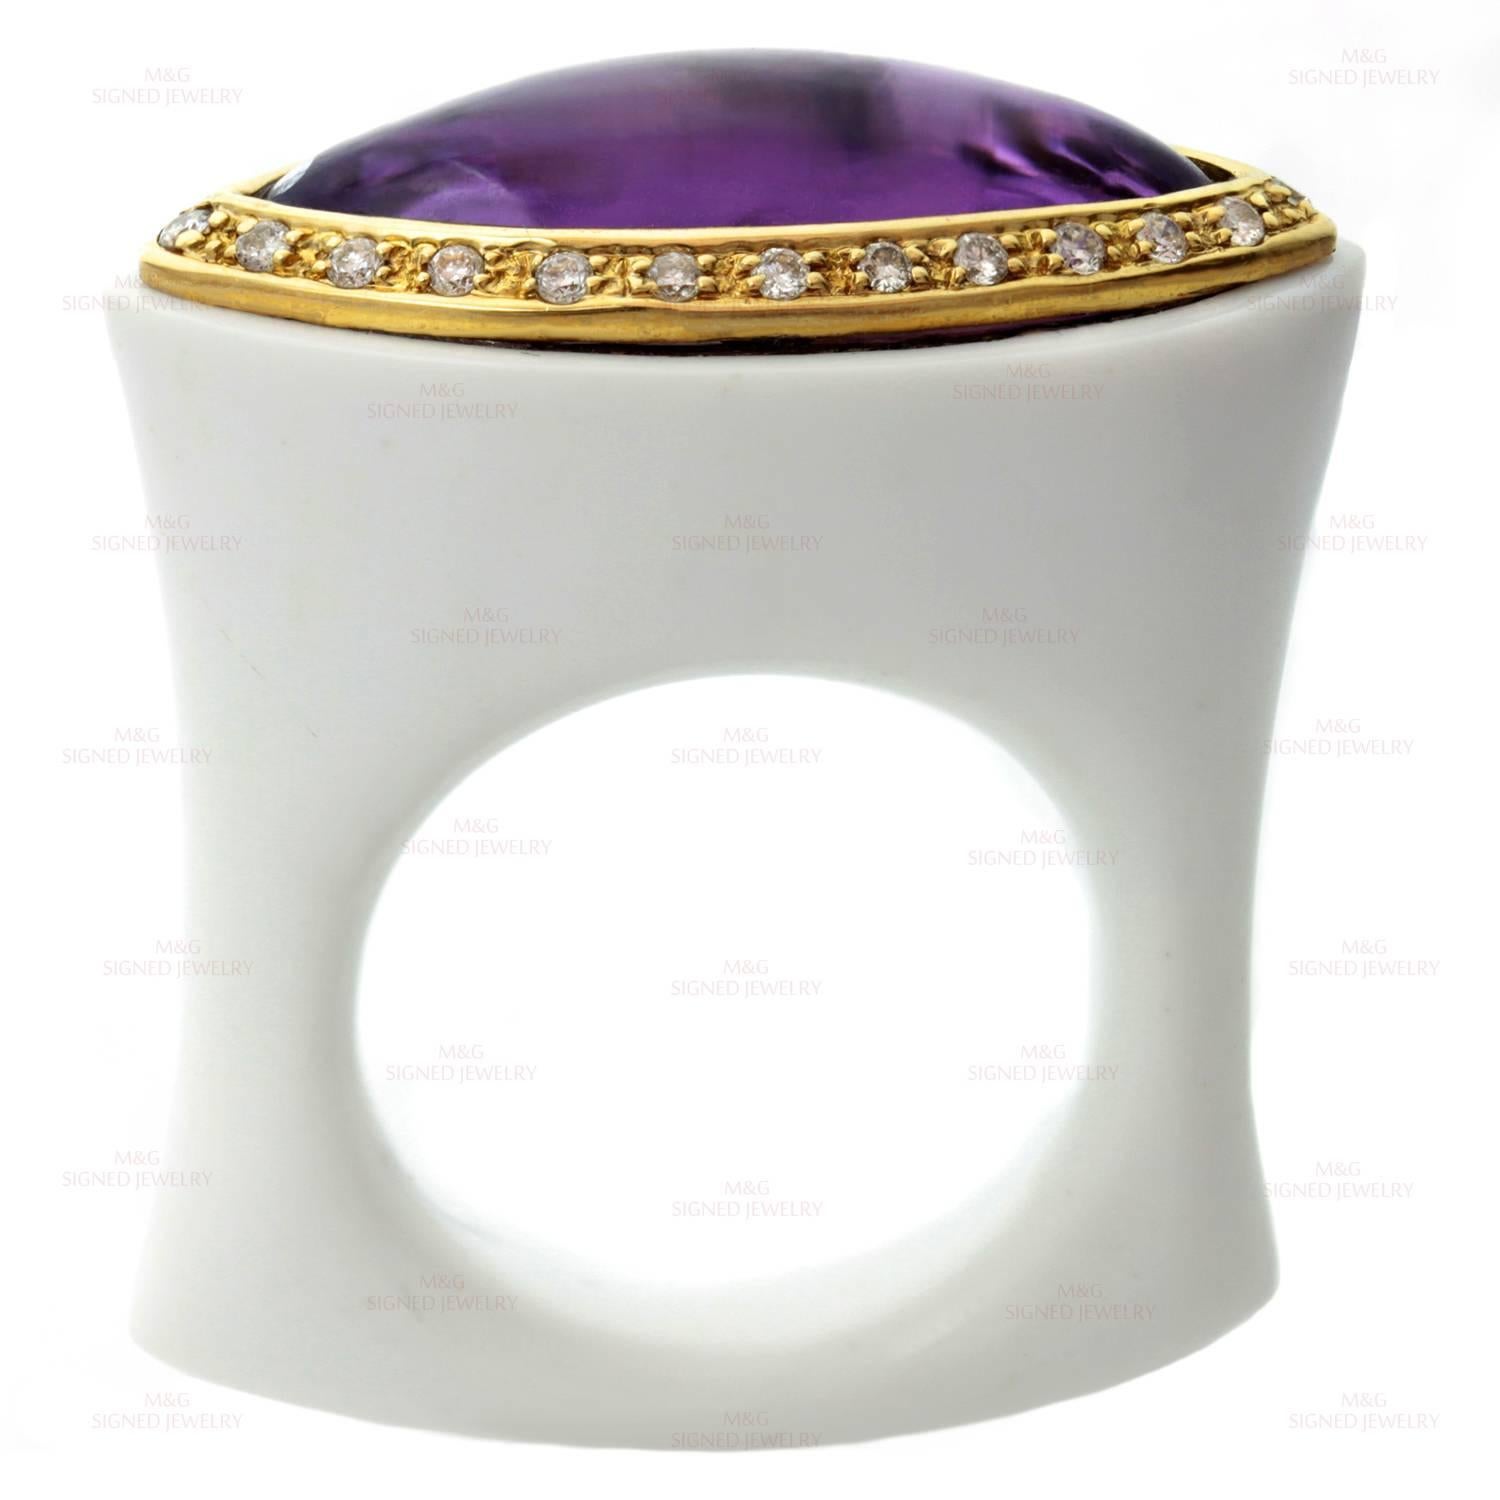 Marquise Cut Amethyst Diamond White Agate Yellow Gold Ring Size 53